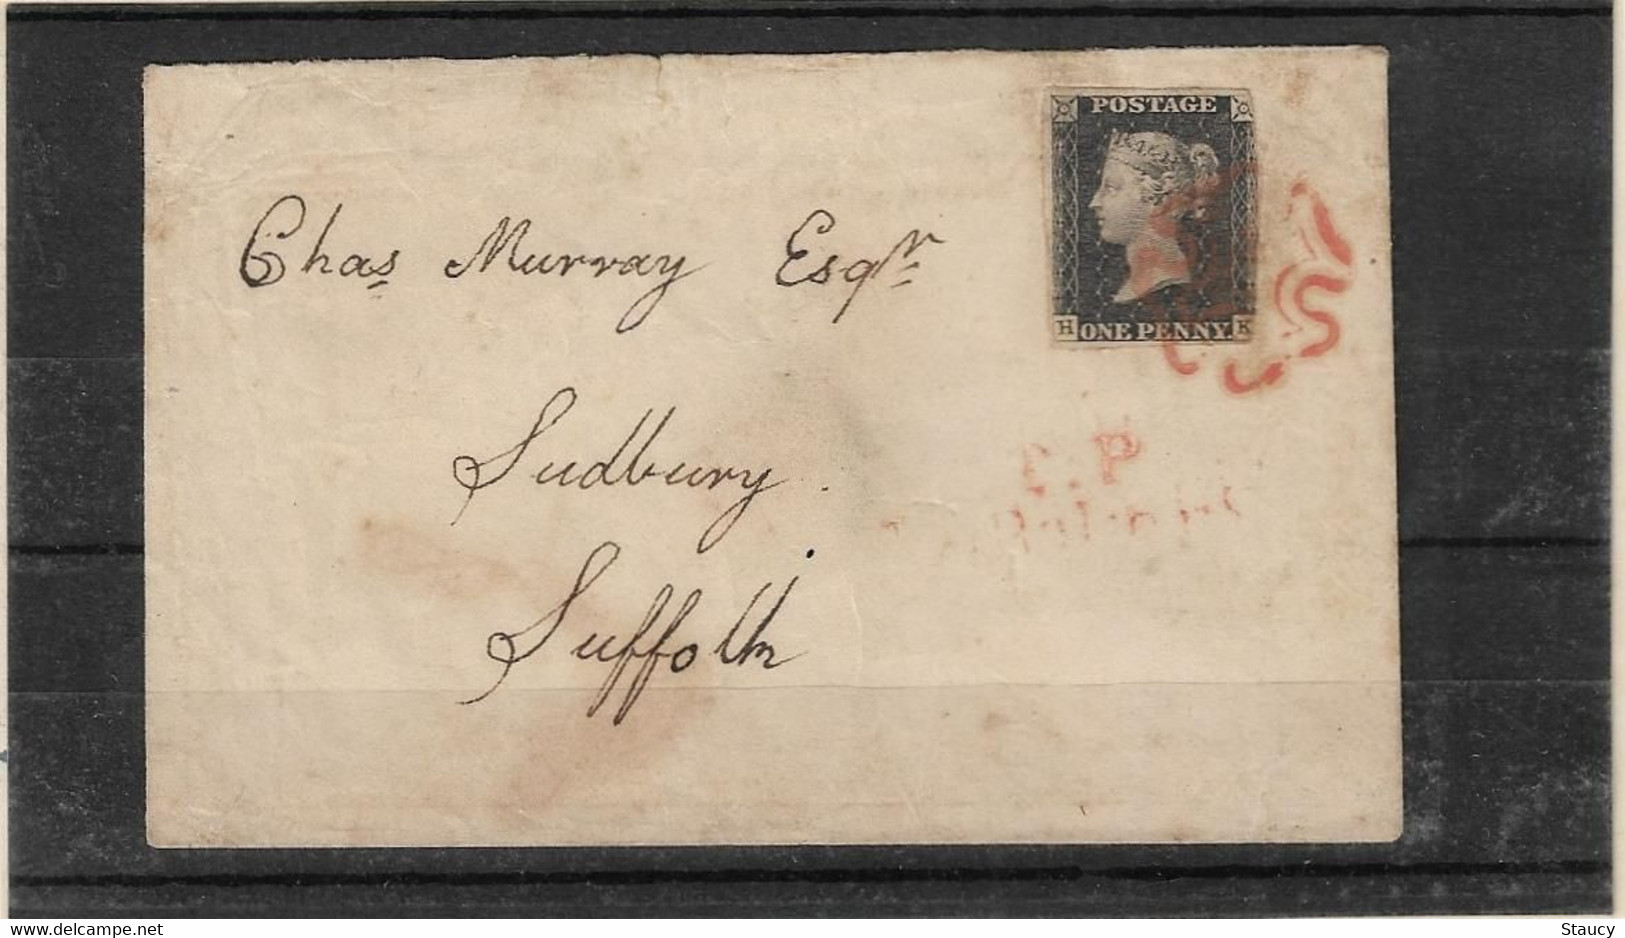 UK GB GREAT BRITAIN 1840 SG1 One Penny Black On Cover ....? To Sudbury (HK) Used As Per Scan - Lettres & Documents